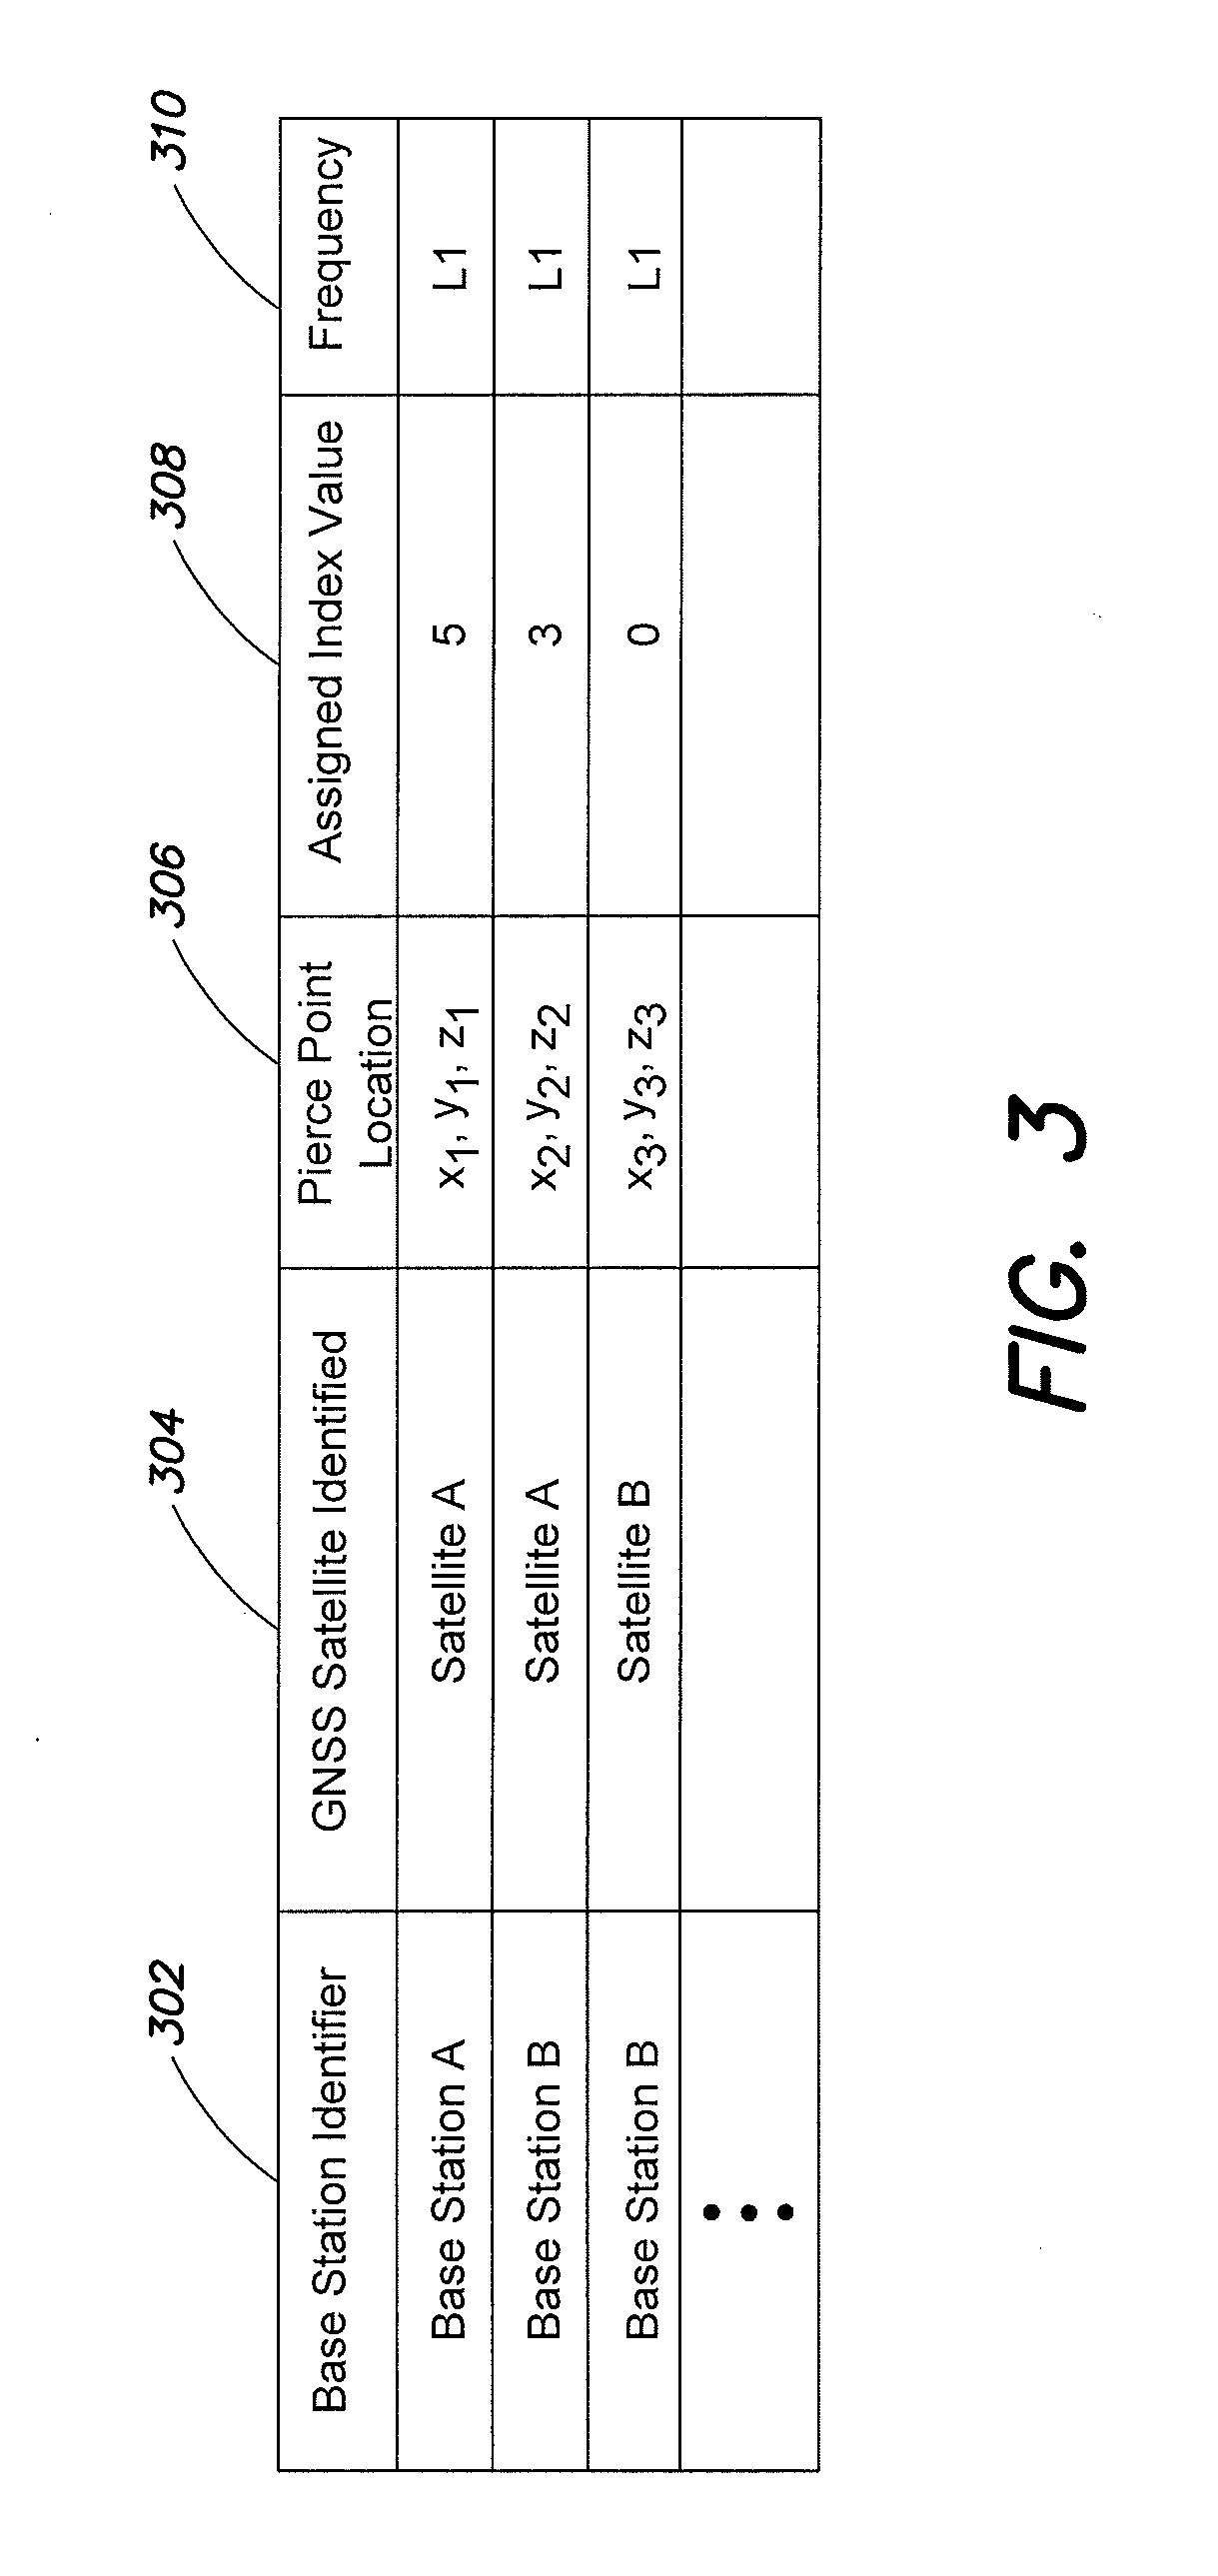 System and method for generating a phase scintillation map utilized for de-weighting observations from GNSS satellites